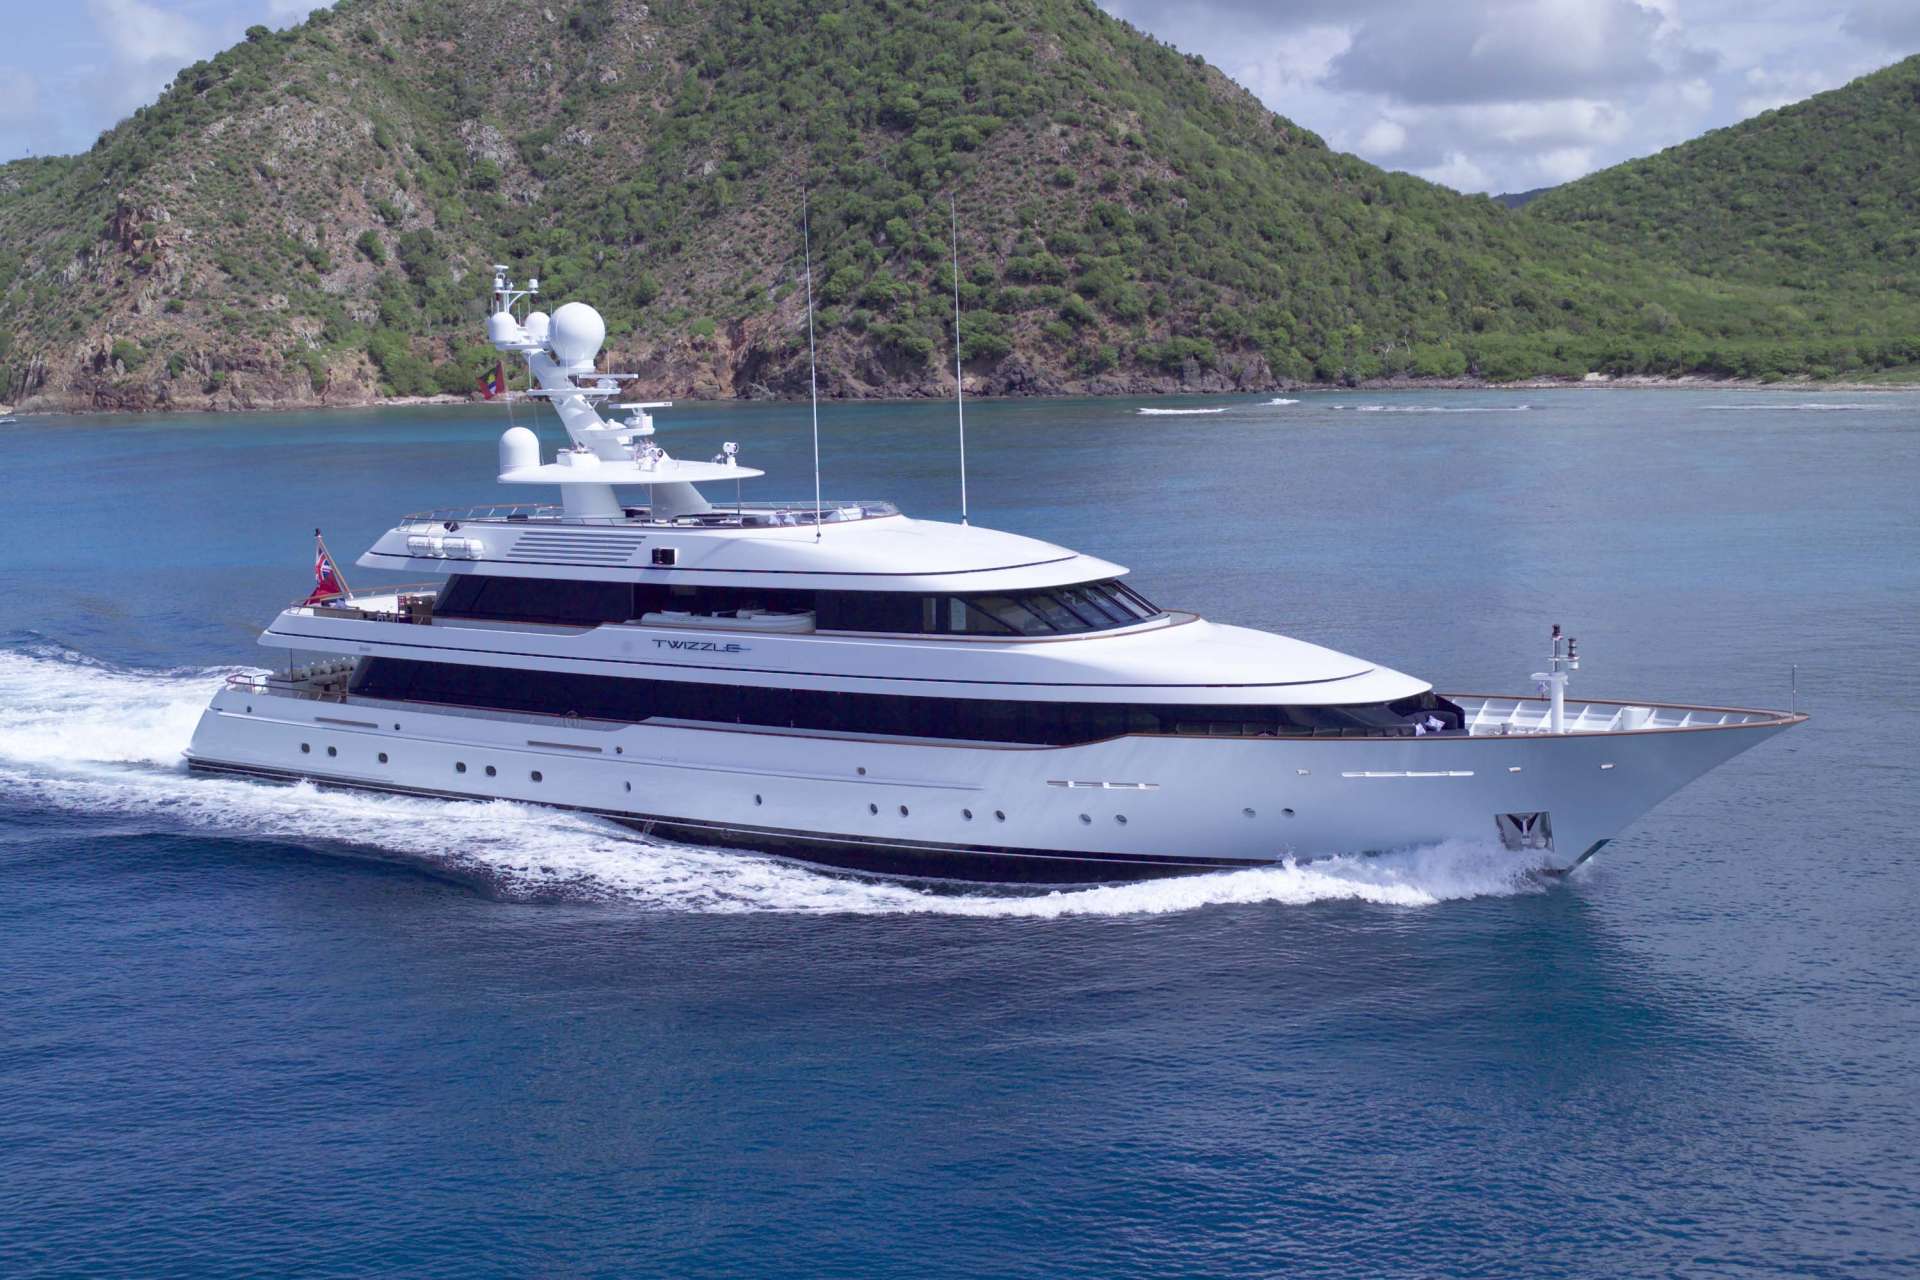 MARY A Yacht • Feadship • 2005 • Owner Thomas O’Malley